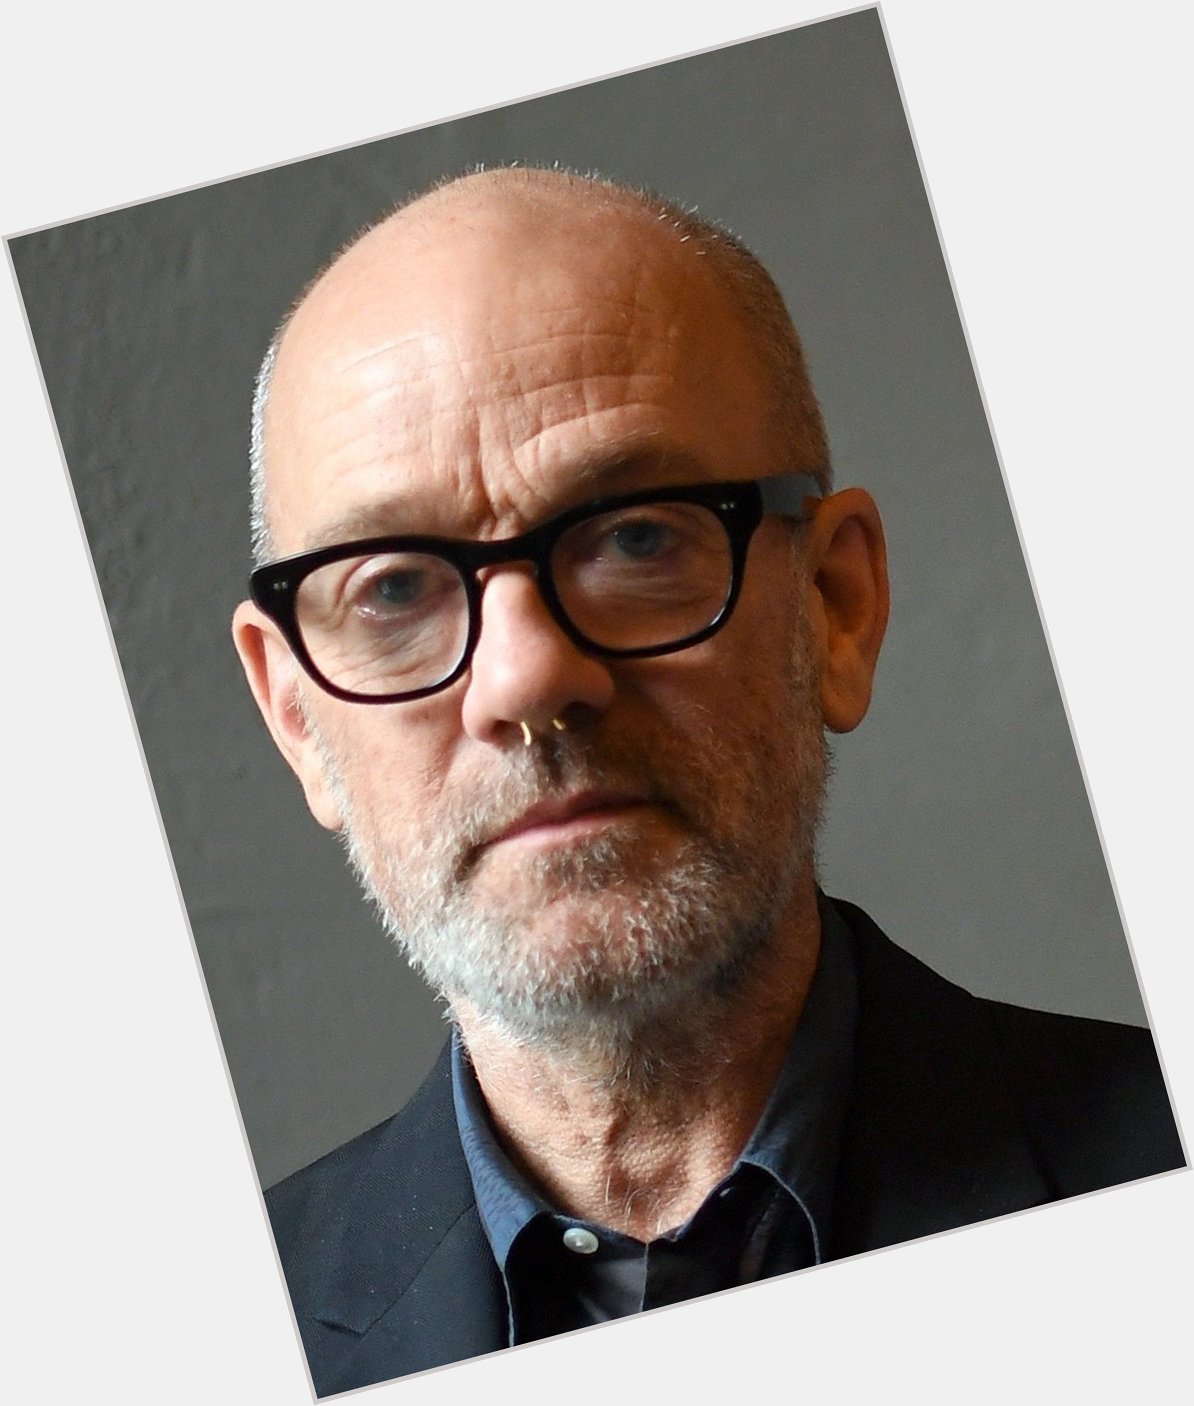 Please join us here at in wishing the one and only Michael Stipe a very Happy 61st Birthday today  